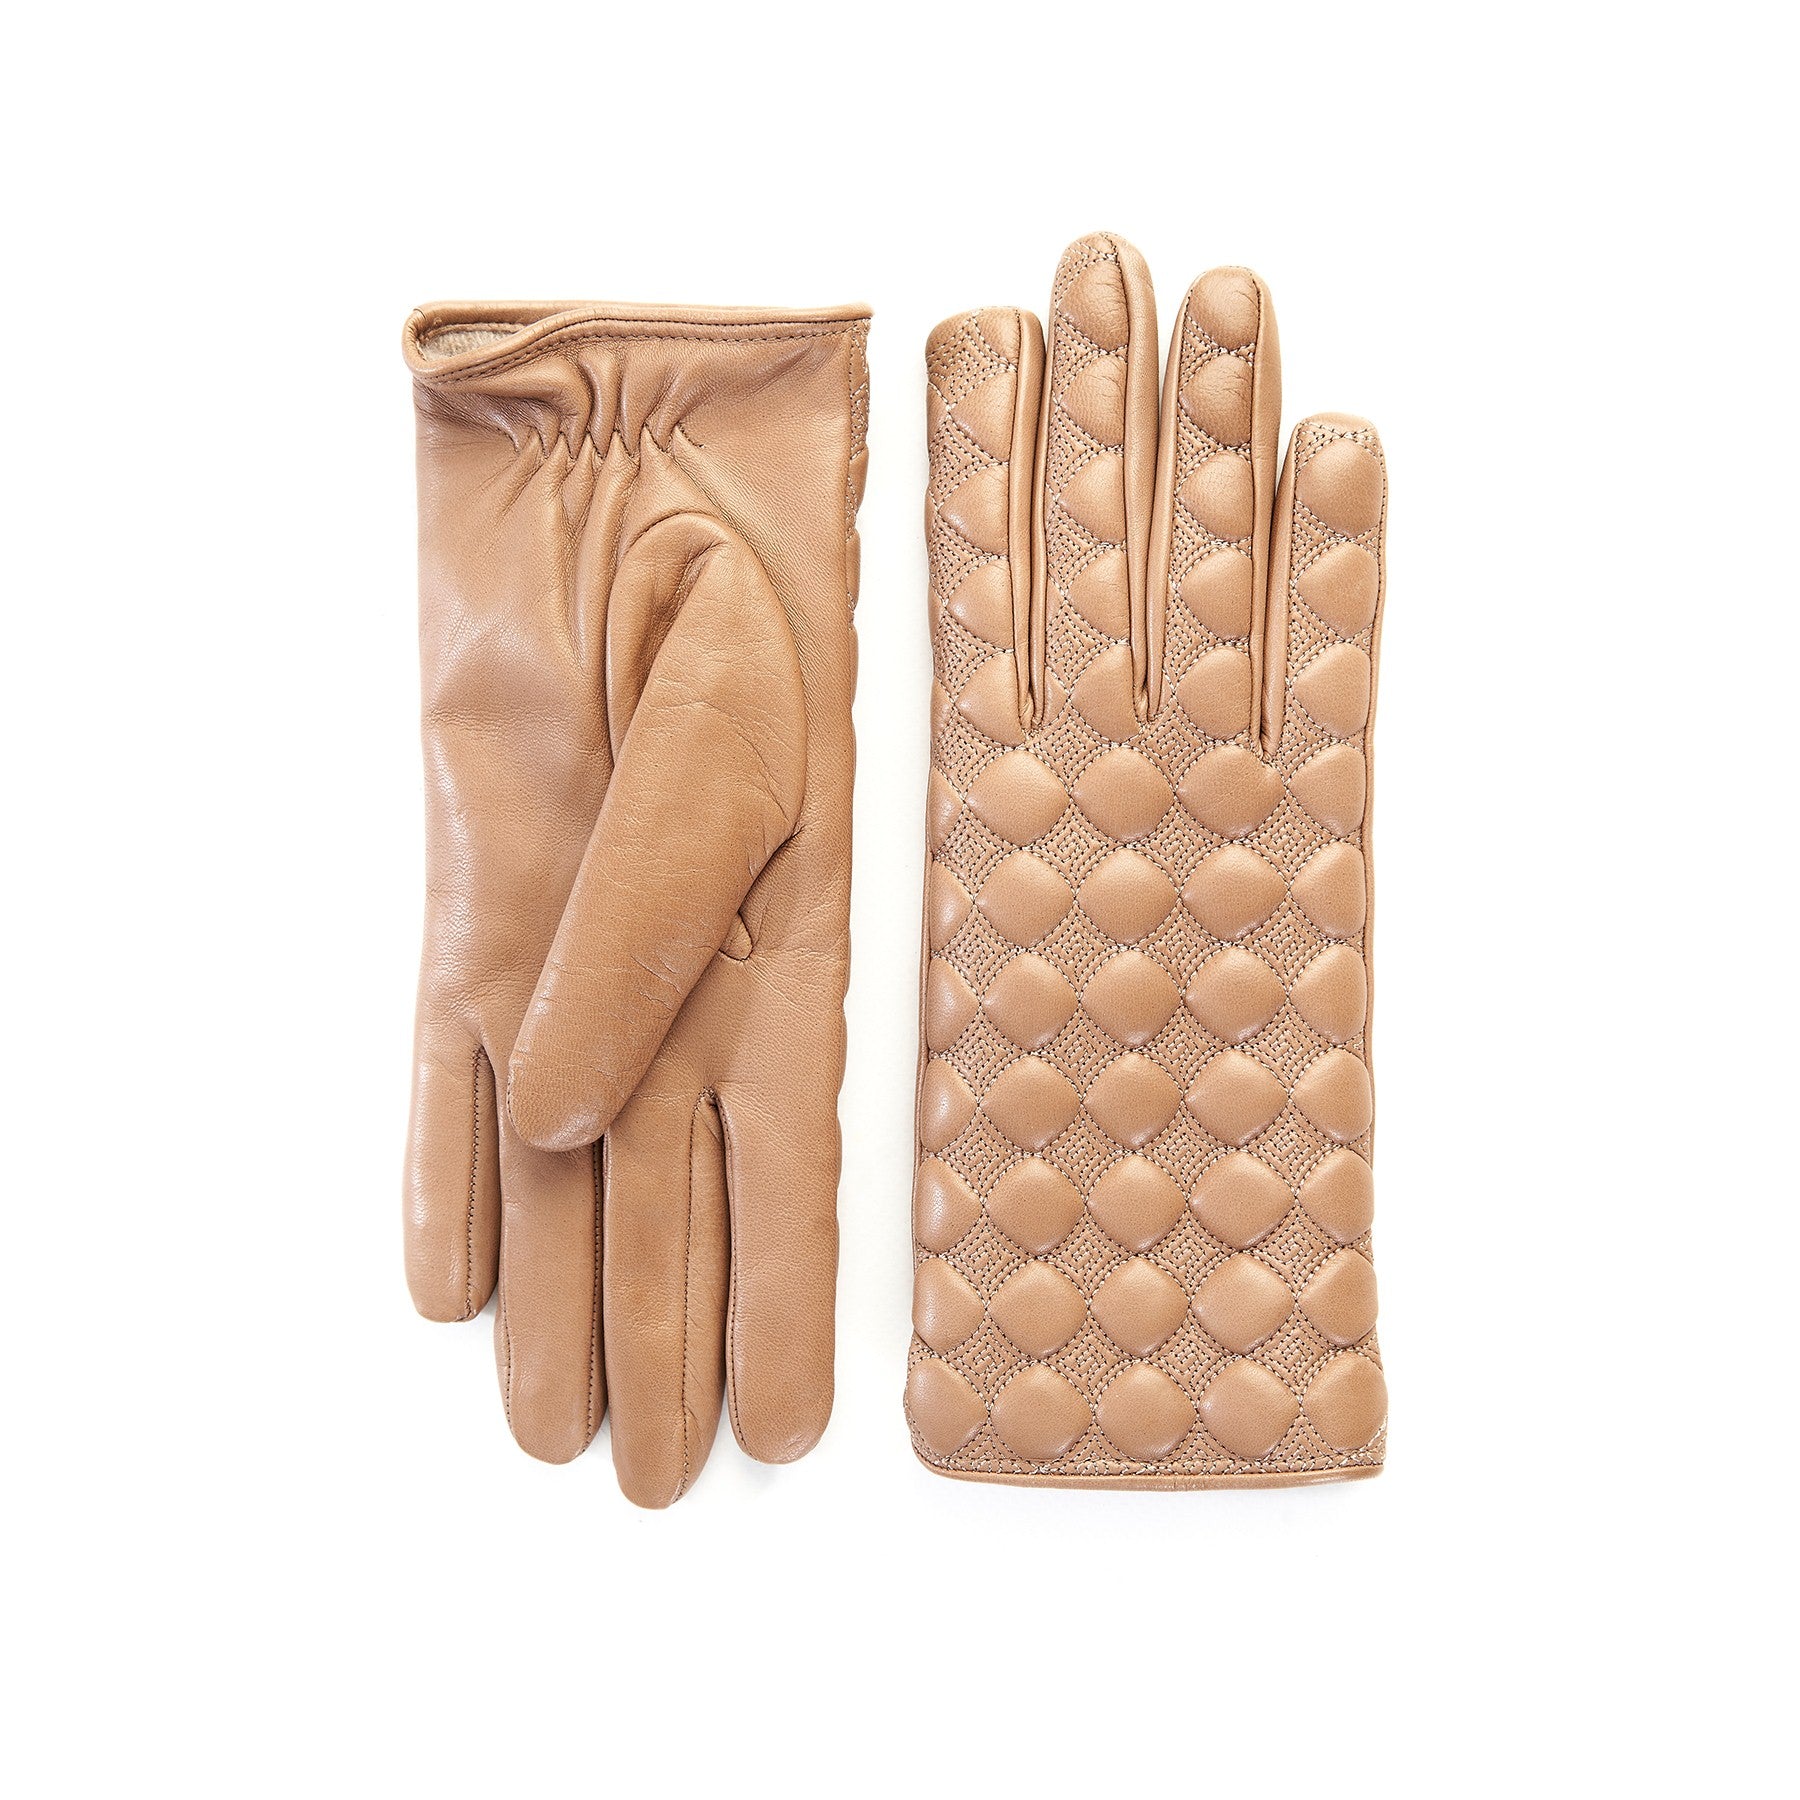 Women's quilted beige leather gloves with cashmere lining